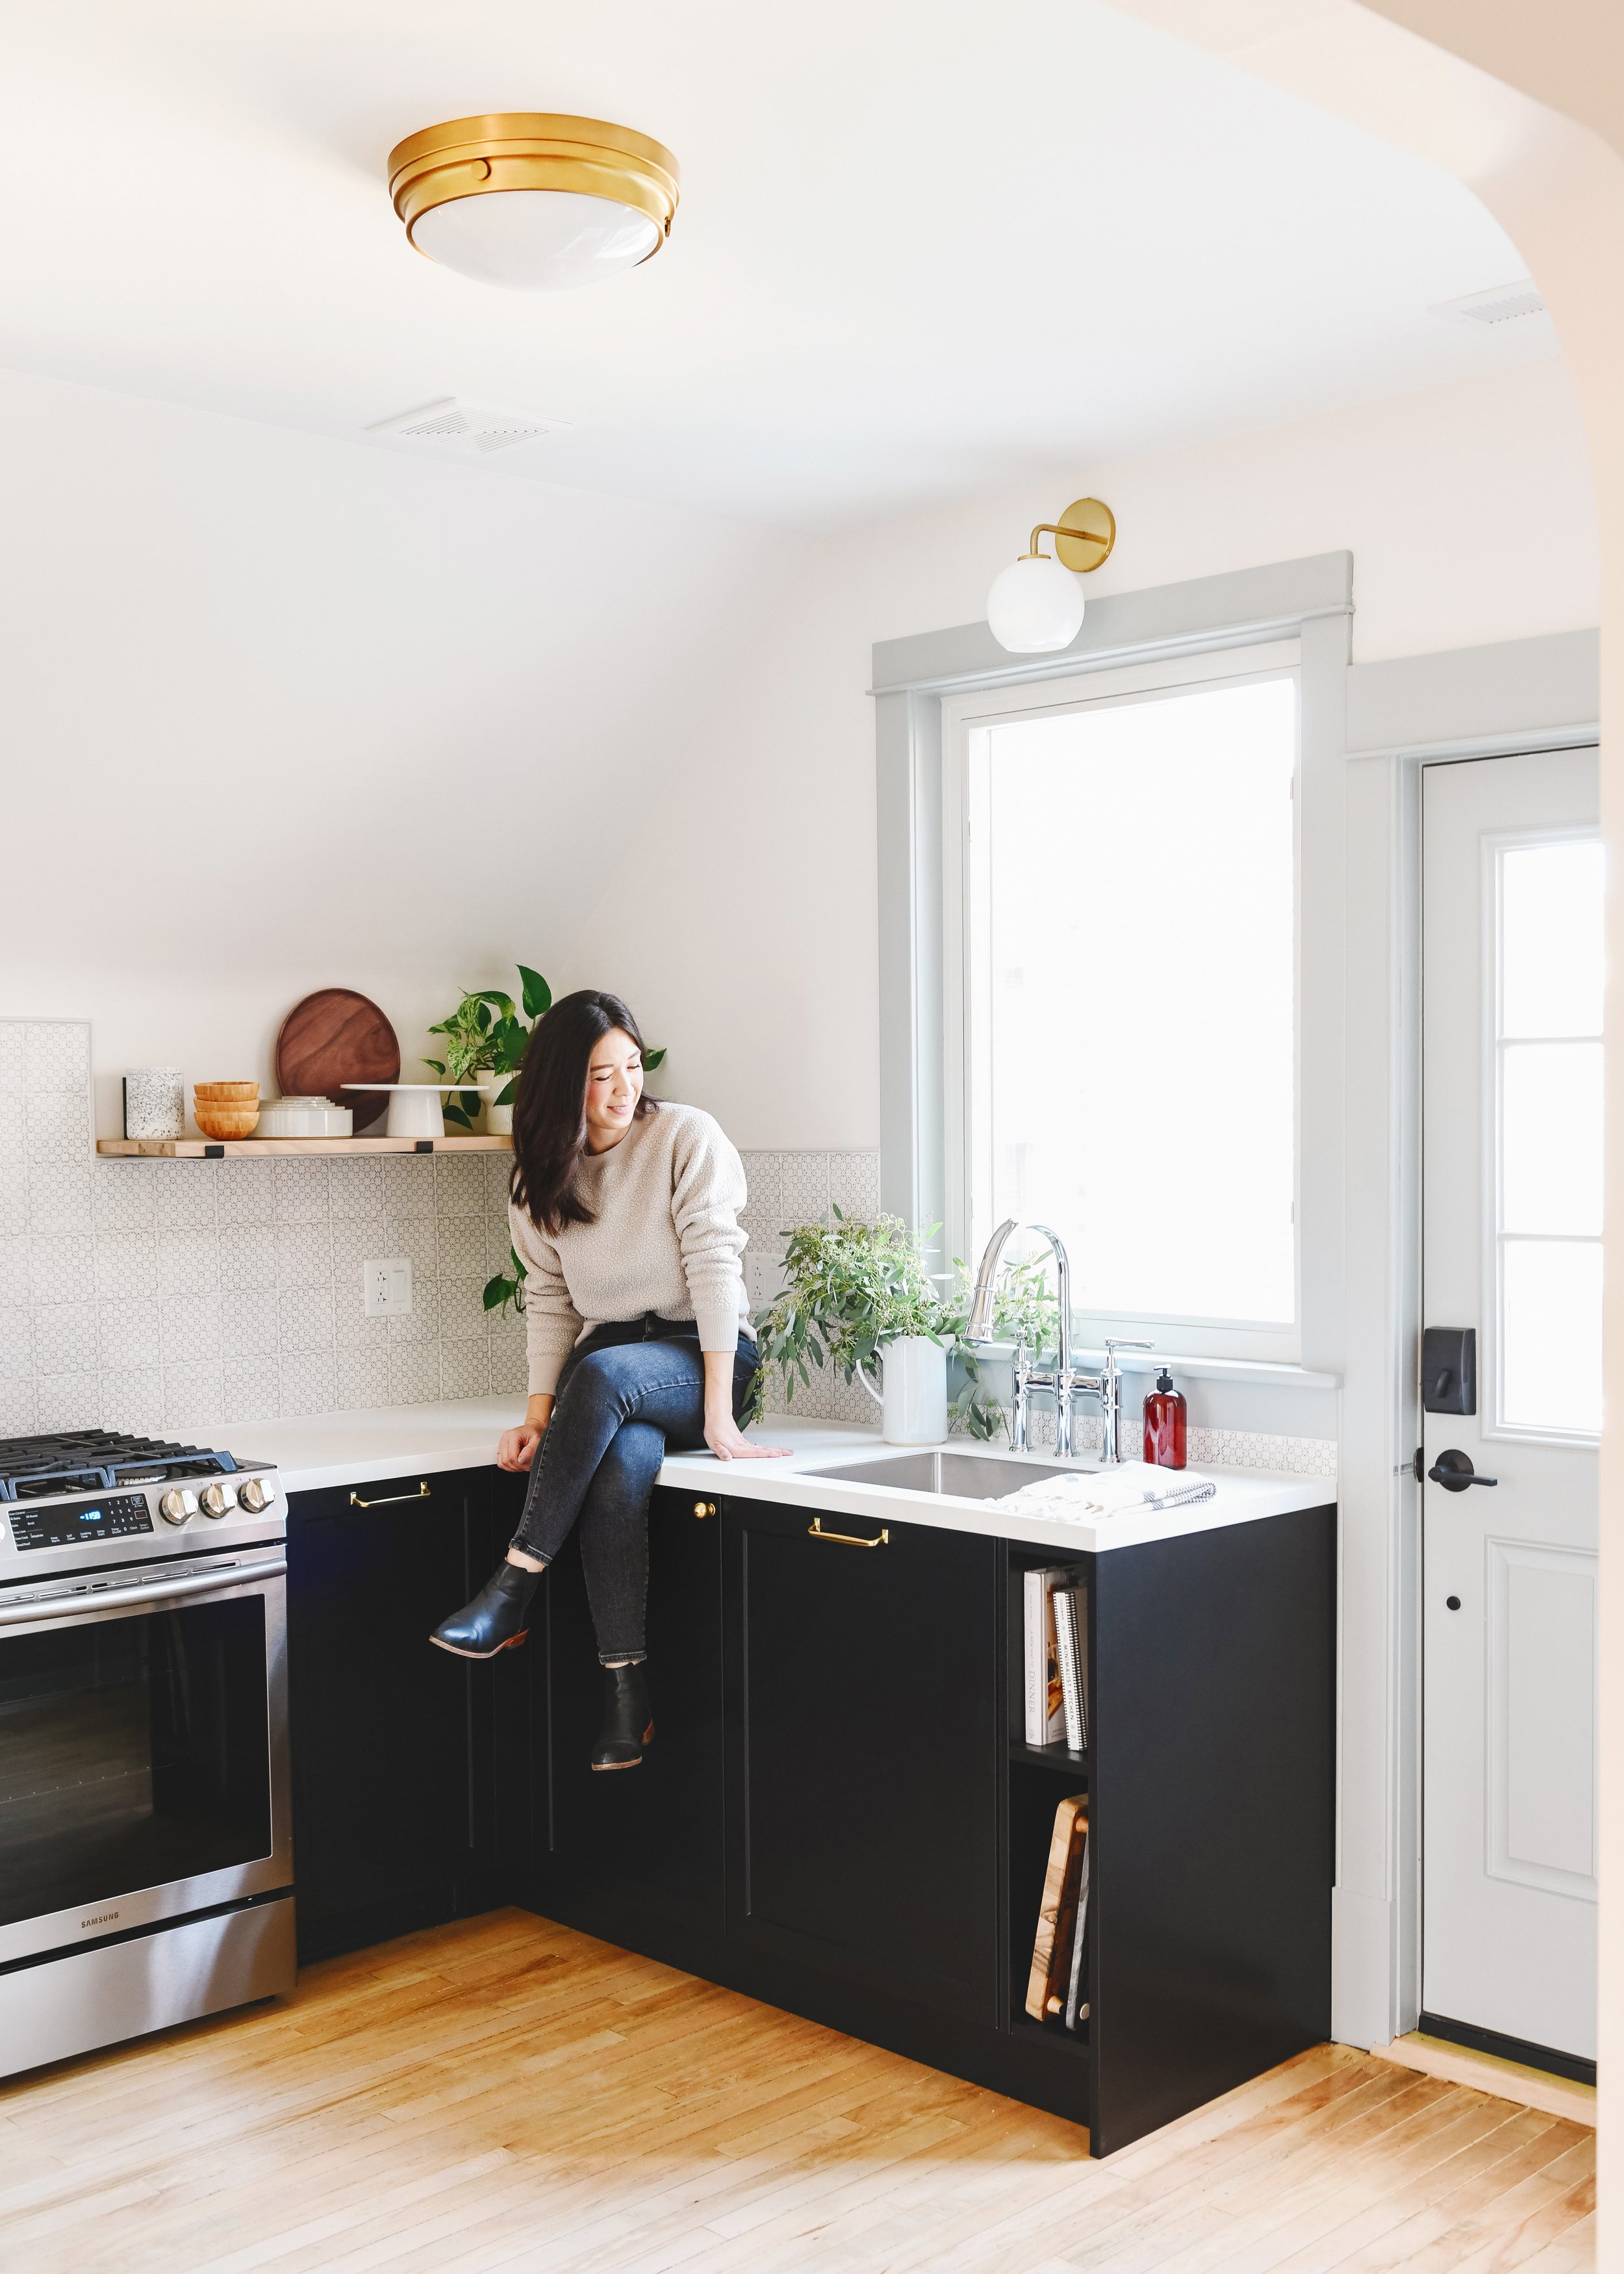 Kim in the Unit 2 kitchen, sitting on the countertop | via Yellow Brick Home